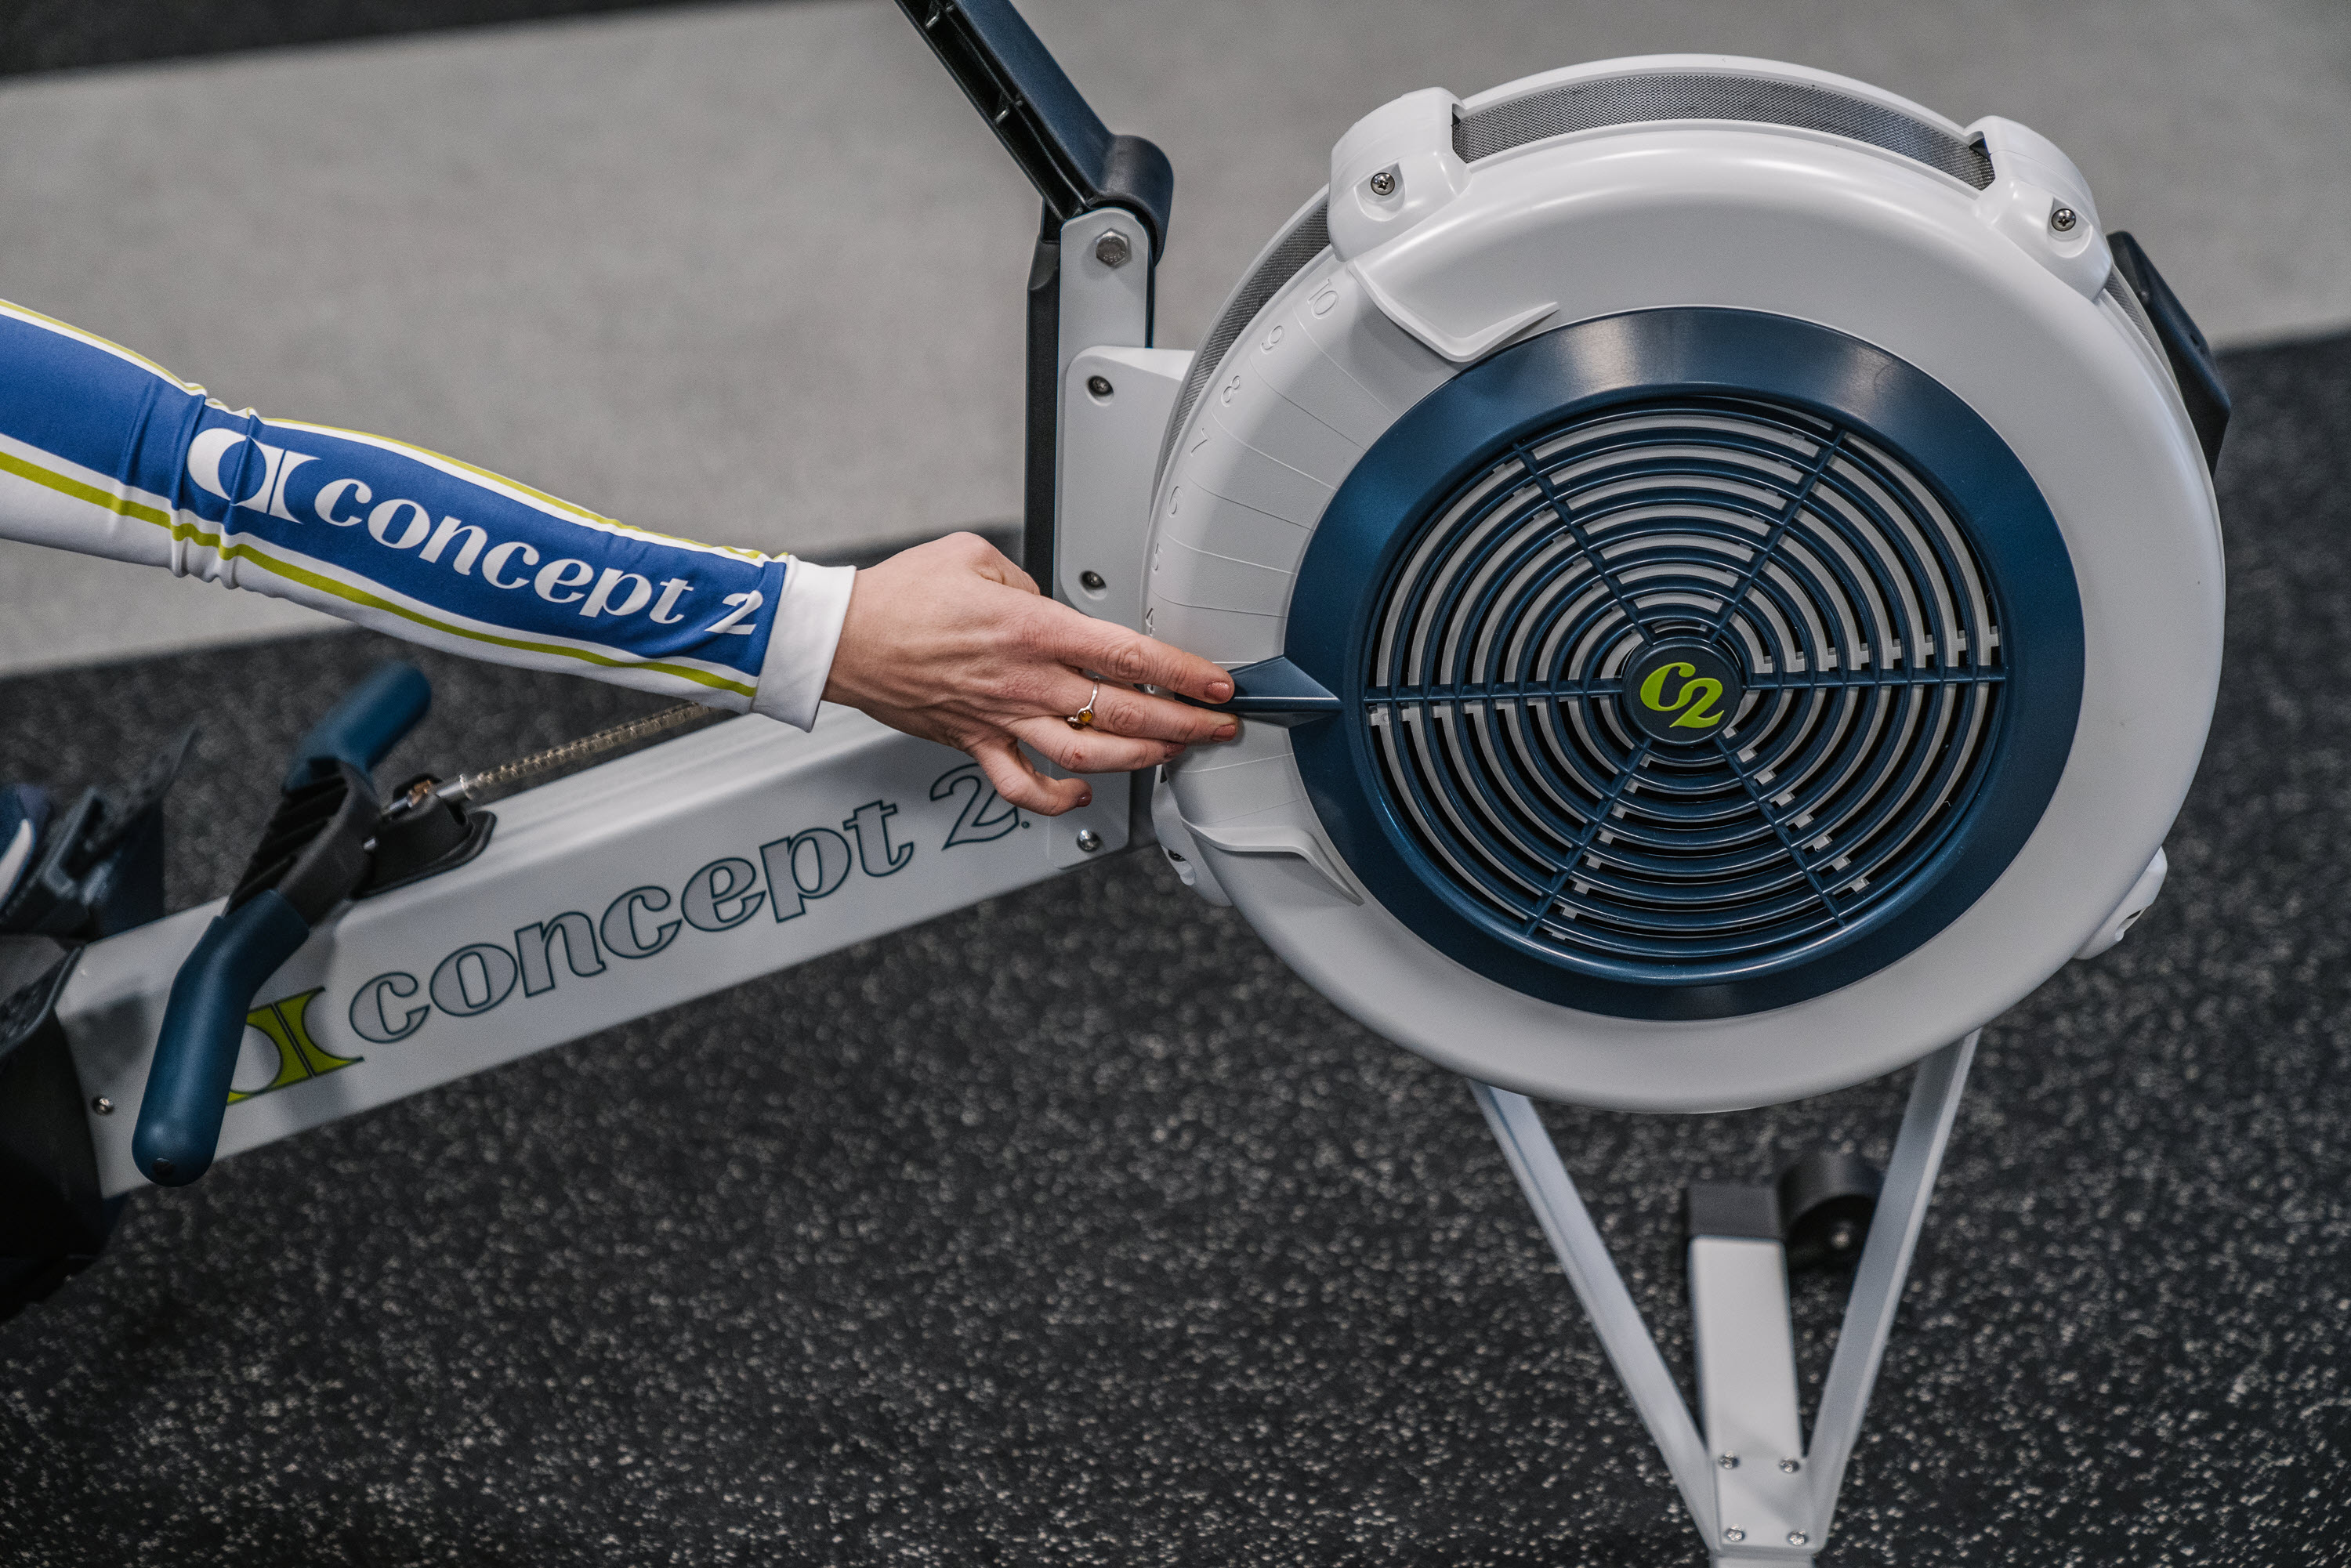 What is the best setting on a rowing machine?